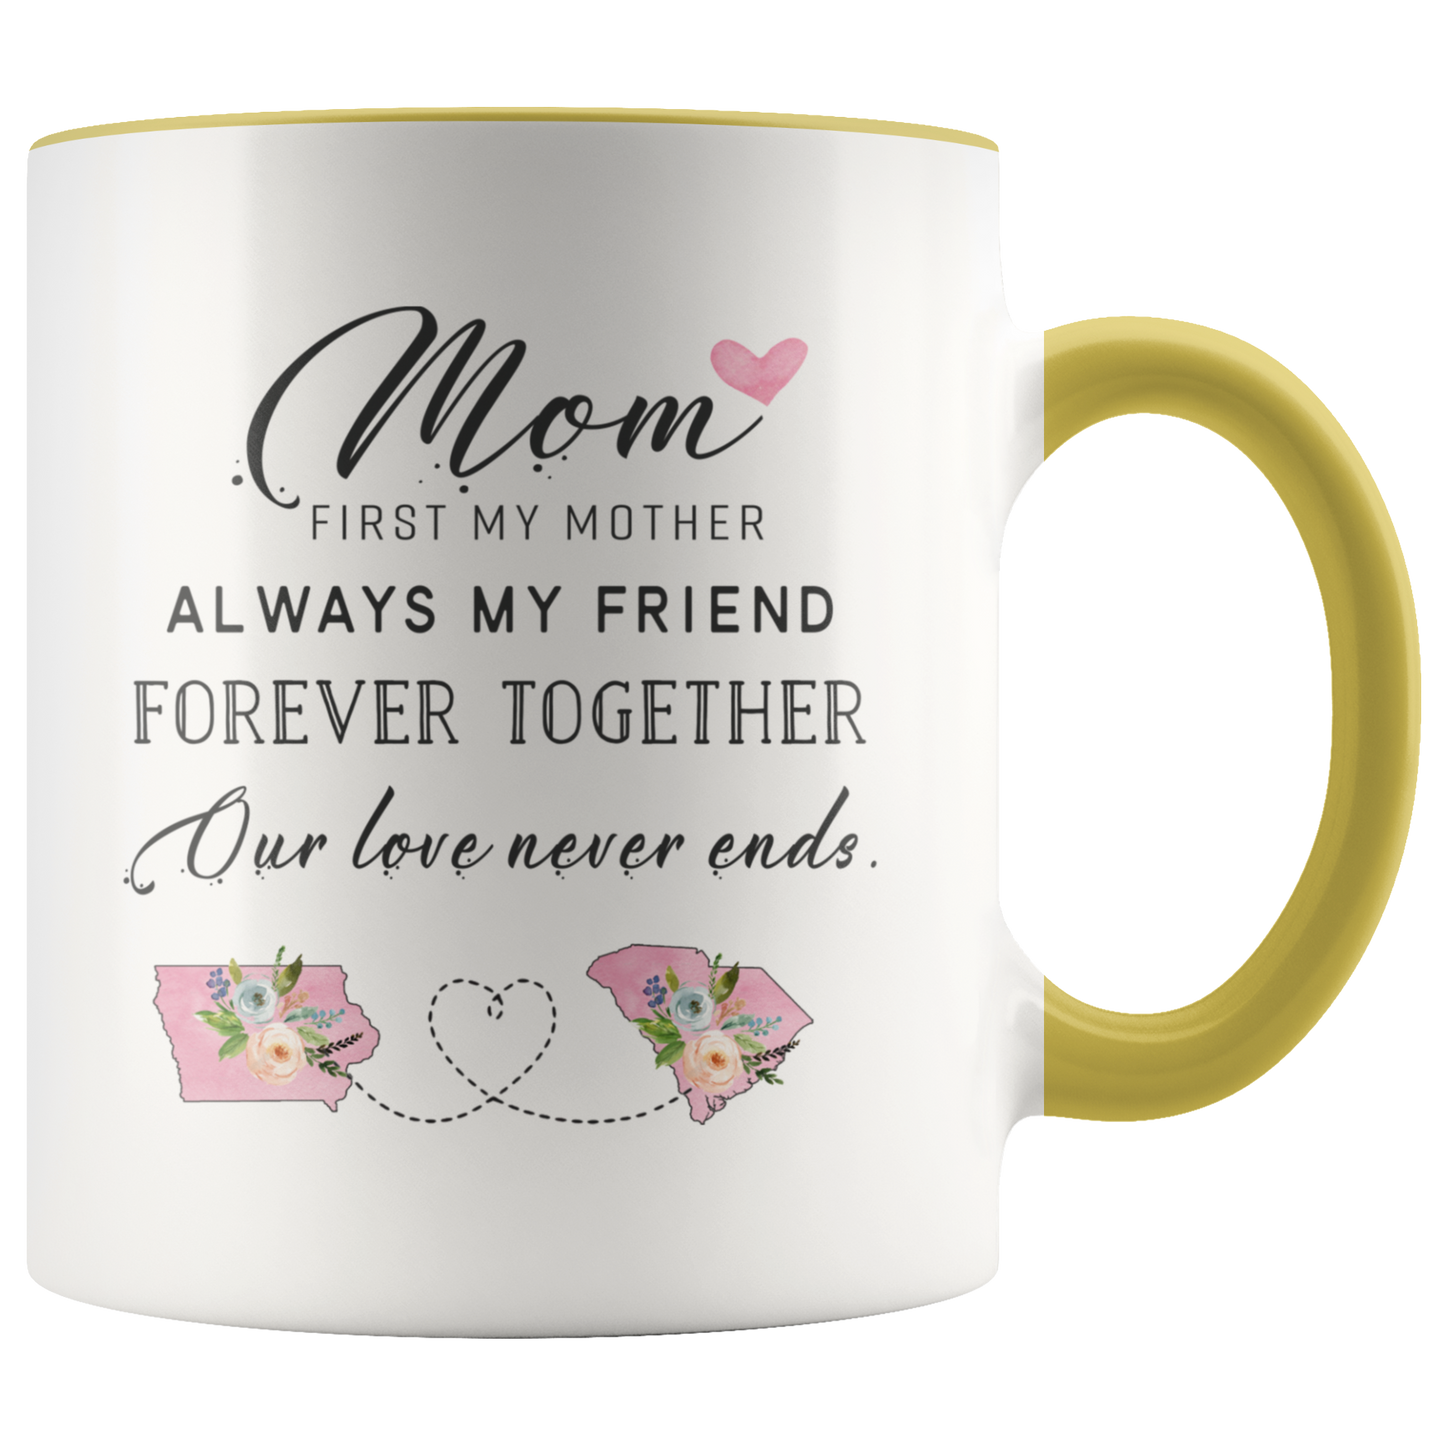 ND-21360050-sp-25933 - [ Iowa | South Carolina ] (CC_Accent_Mug_) Mothers Day Accent Mug  - Mom, First My Mother Always My